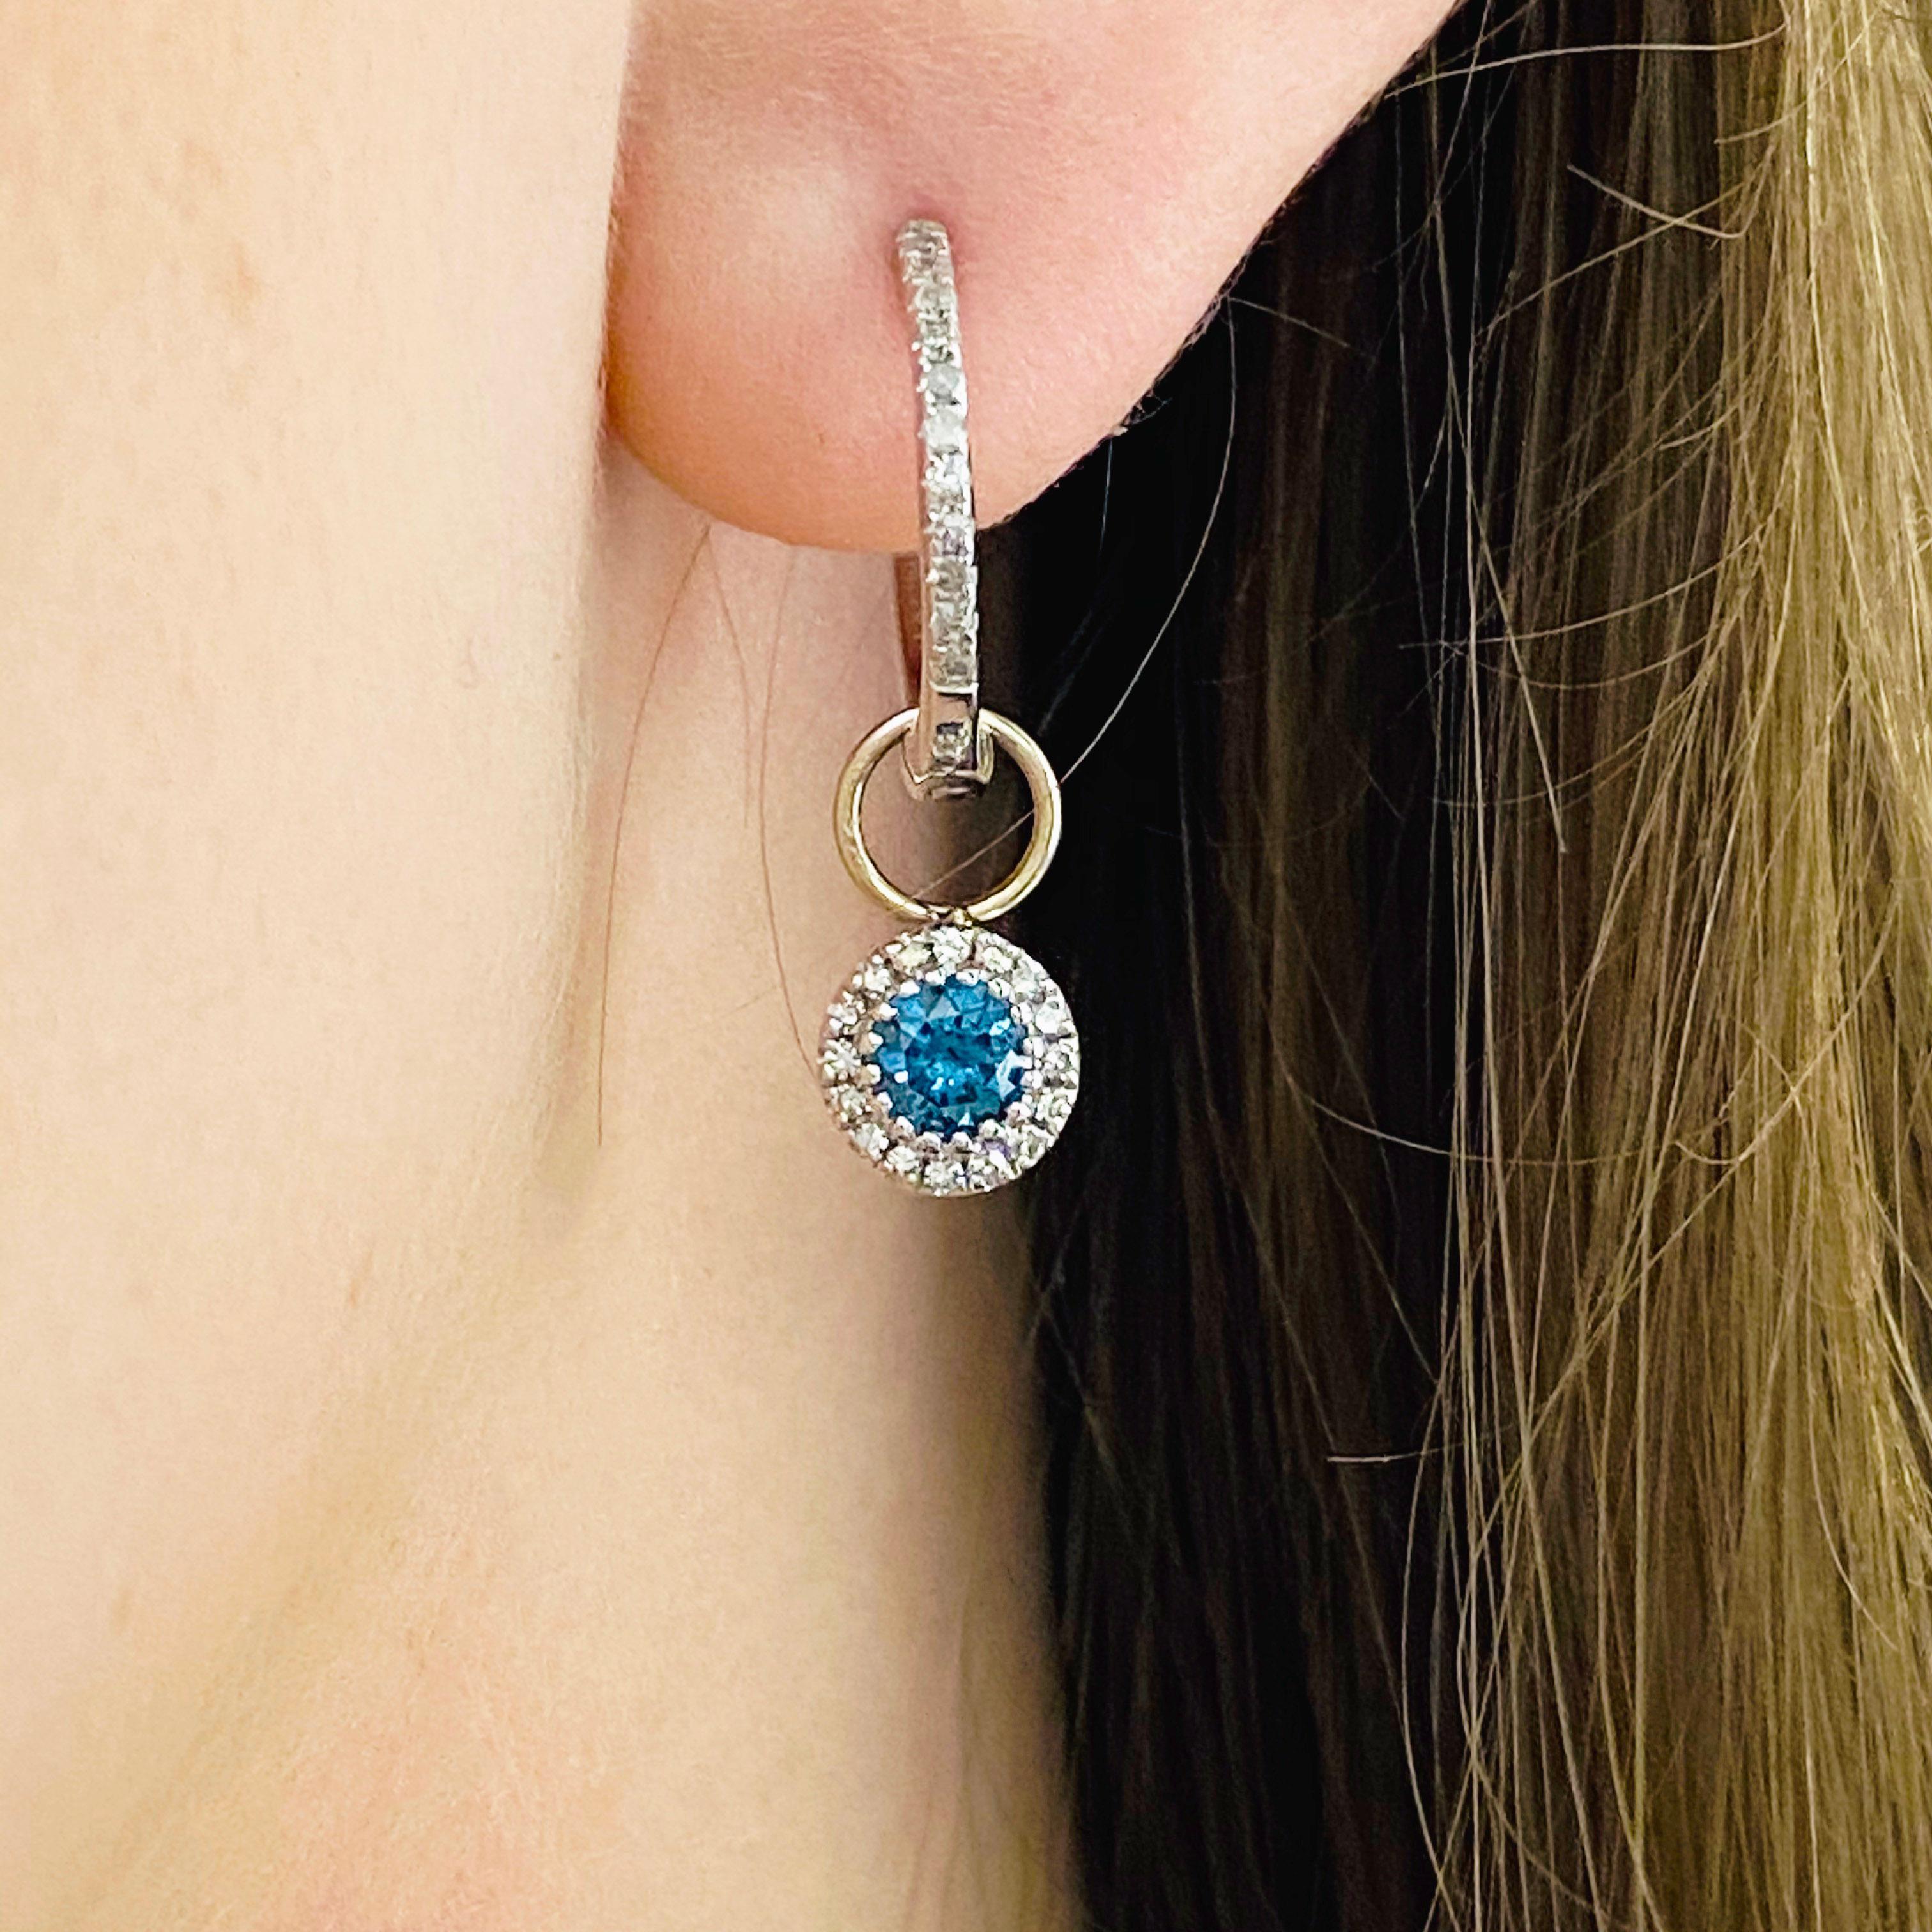 These stunning earring charms are the perfect way to dress up any pair of hoops! With polished 14k white gold surrounding a brilliant round blue topaz and dripping with white diamonds, these charms make the perfect chic and modern accessory for any